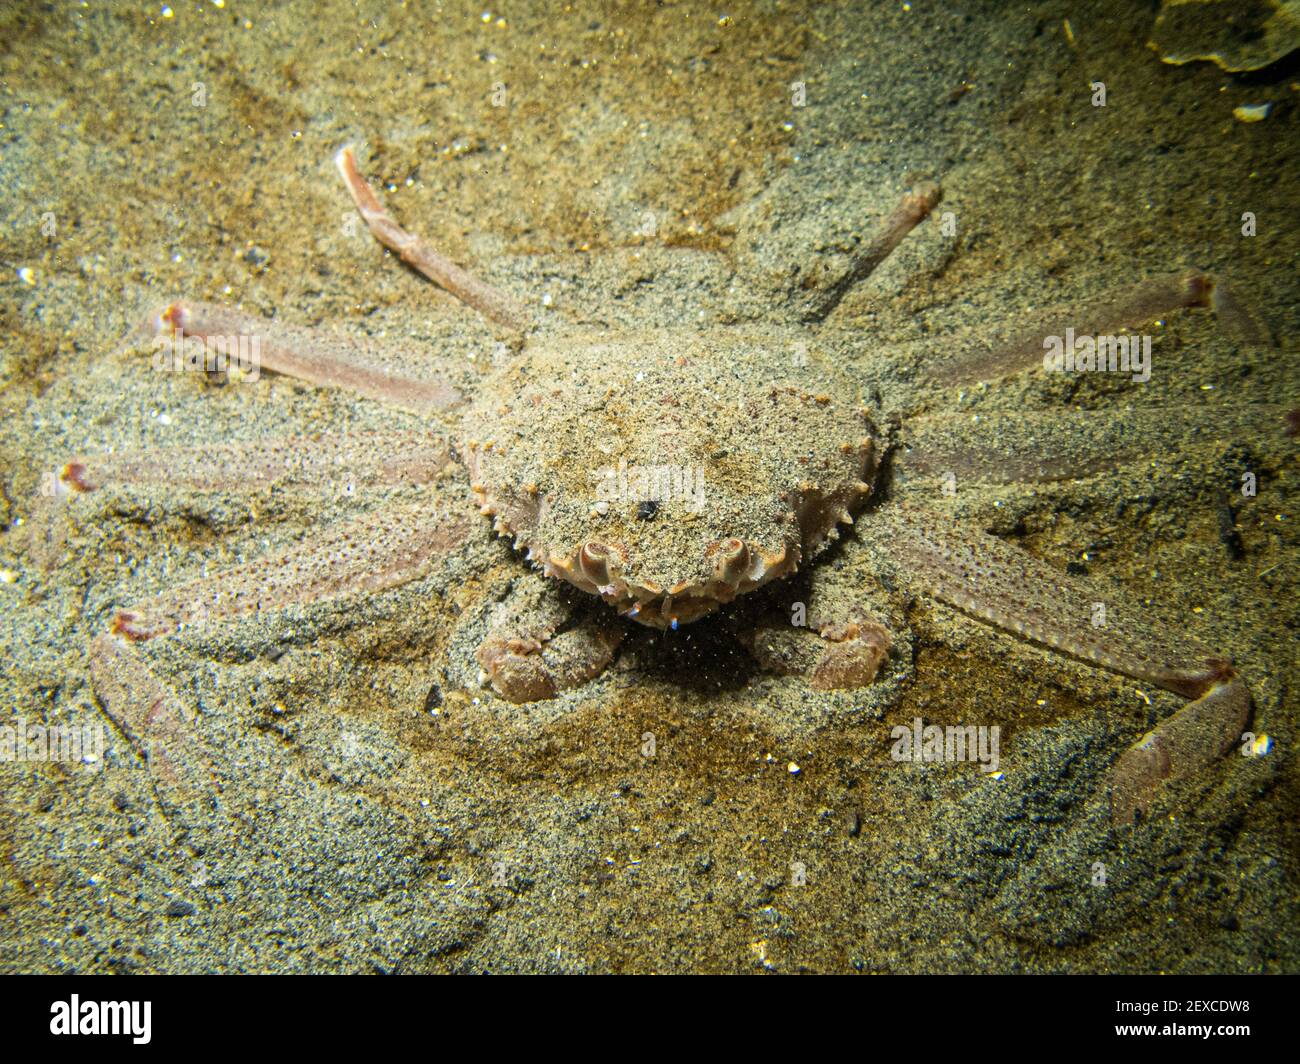 Tanner Crab Burrowed in Sand, Camouflaged Underwater Southeast Alaska Stock Photo